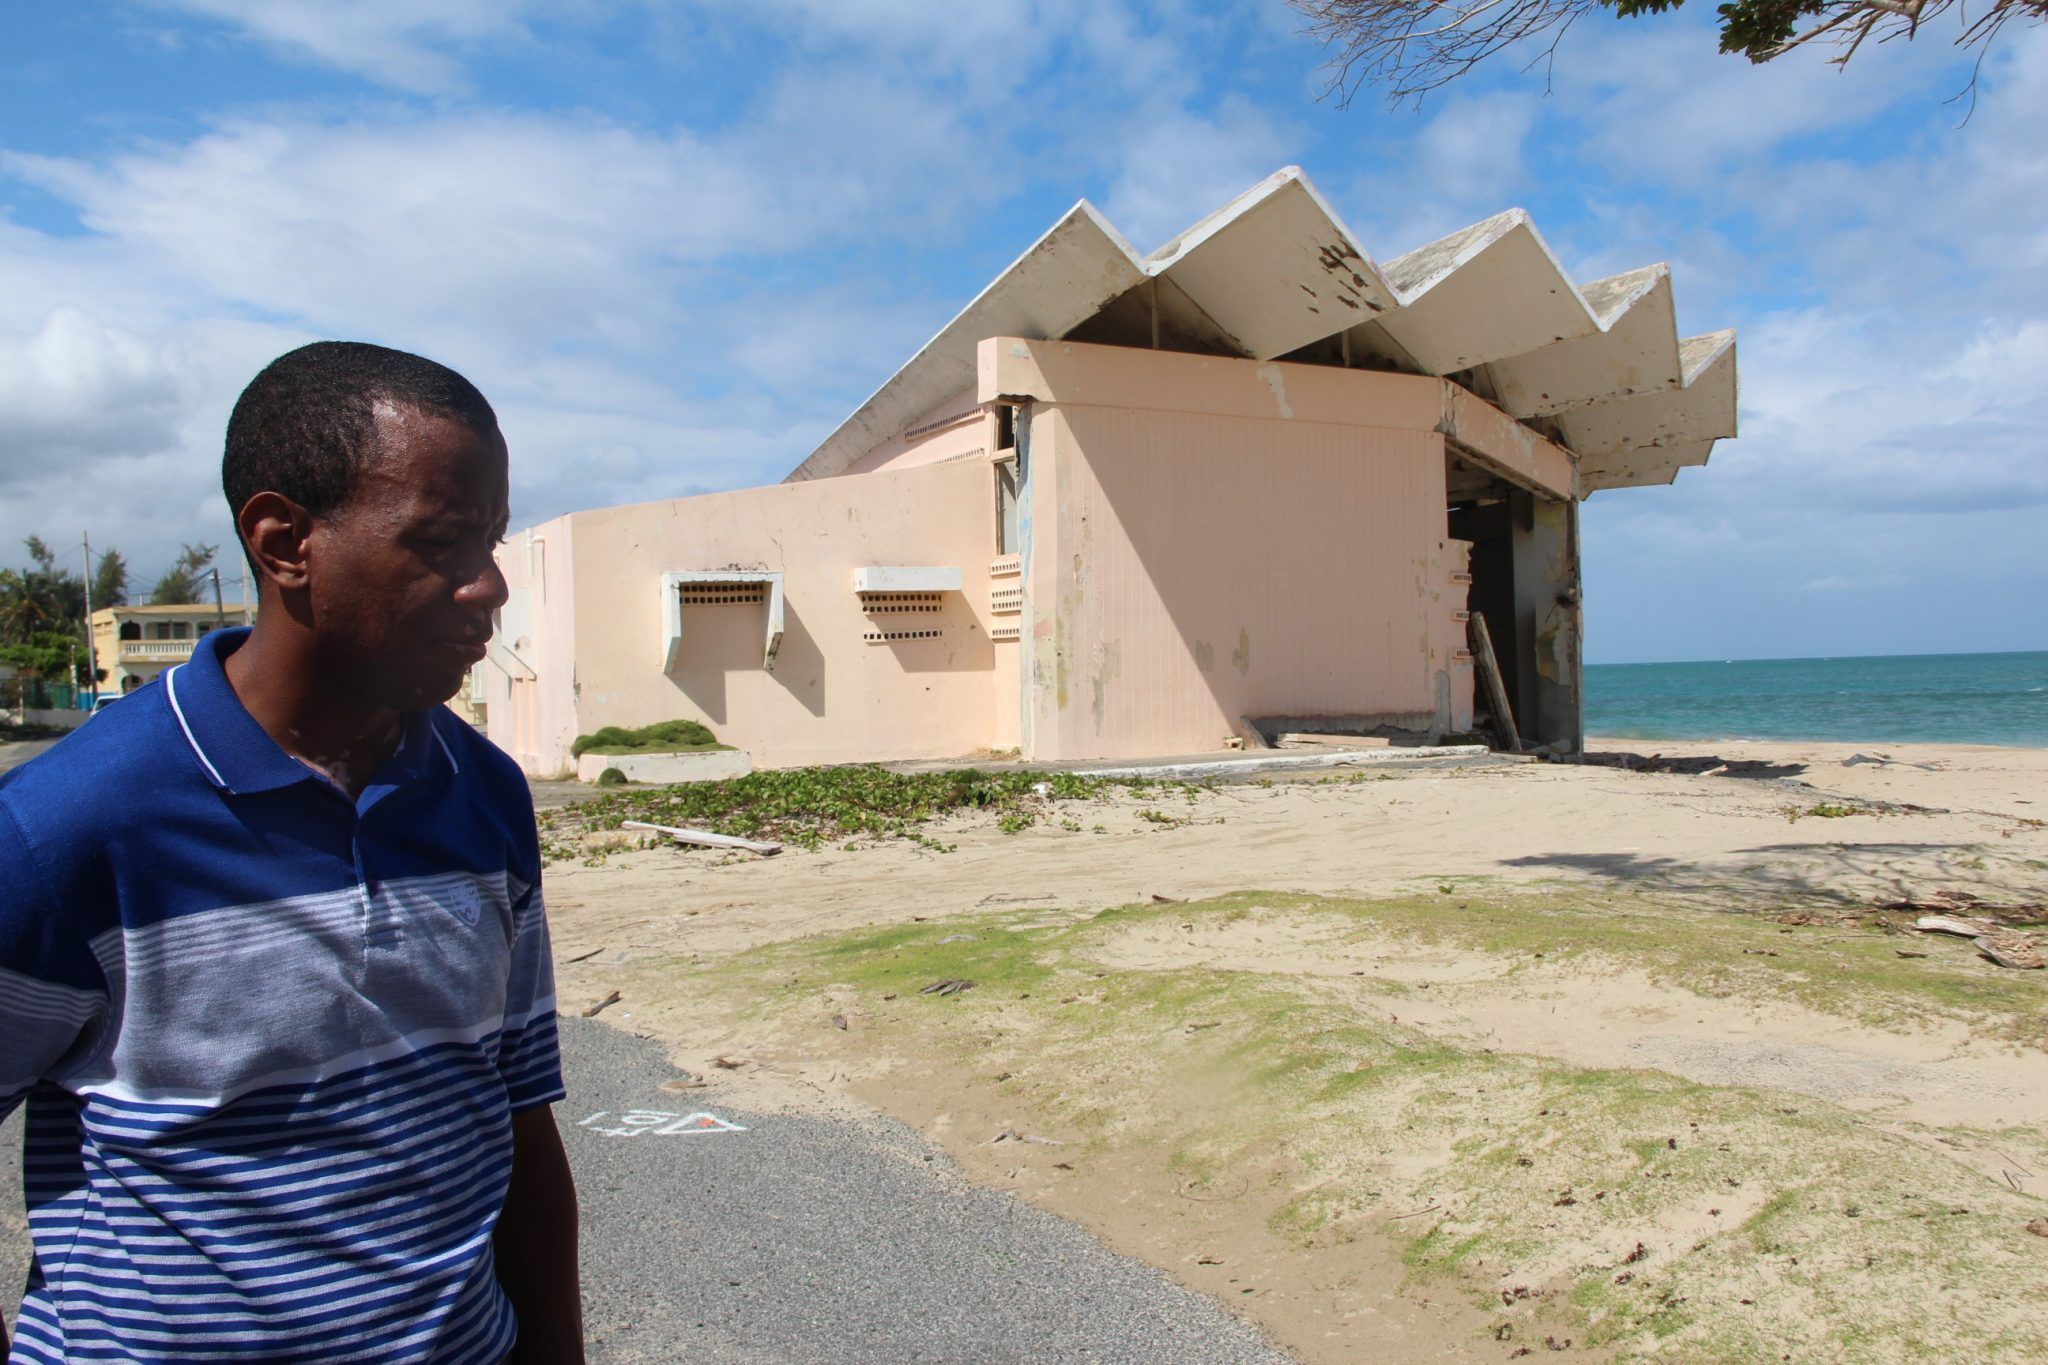 Alexis Correa Allende and the destroyed community center on the beach in Parcelas Suárez. Image by Kari Lydersen. Puerto Rico, 2019.